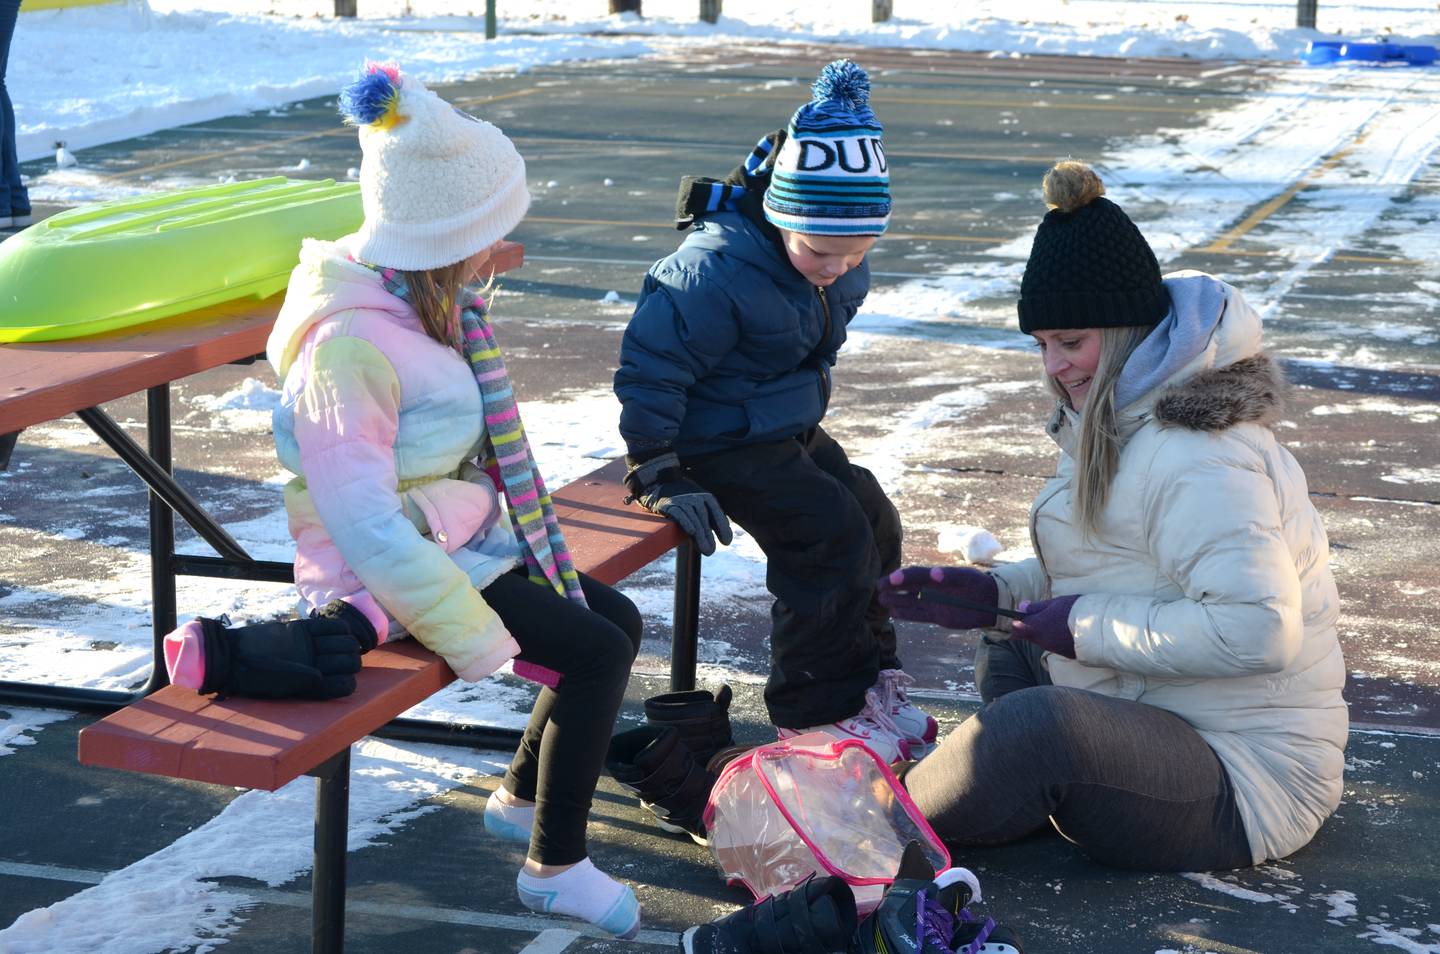 Candi Kuehl of Morrison laces up the ice skates of her children Calvin, 5, and Calista, 7, at Morrison Winter Park on Tuesday, Dec. 27. The family lives near the park and walked over for the grand opening, saying it was their first time for ice skating.